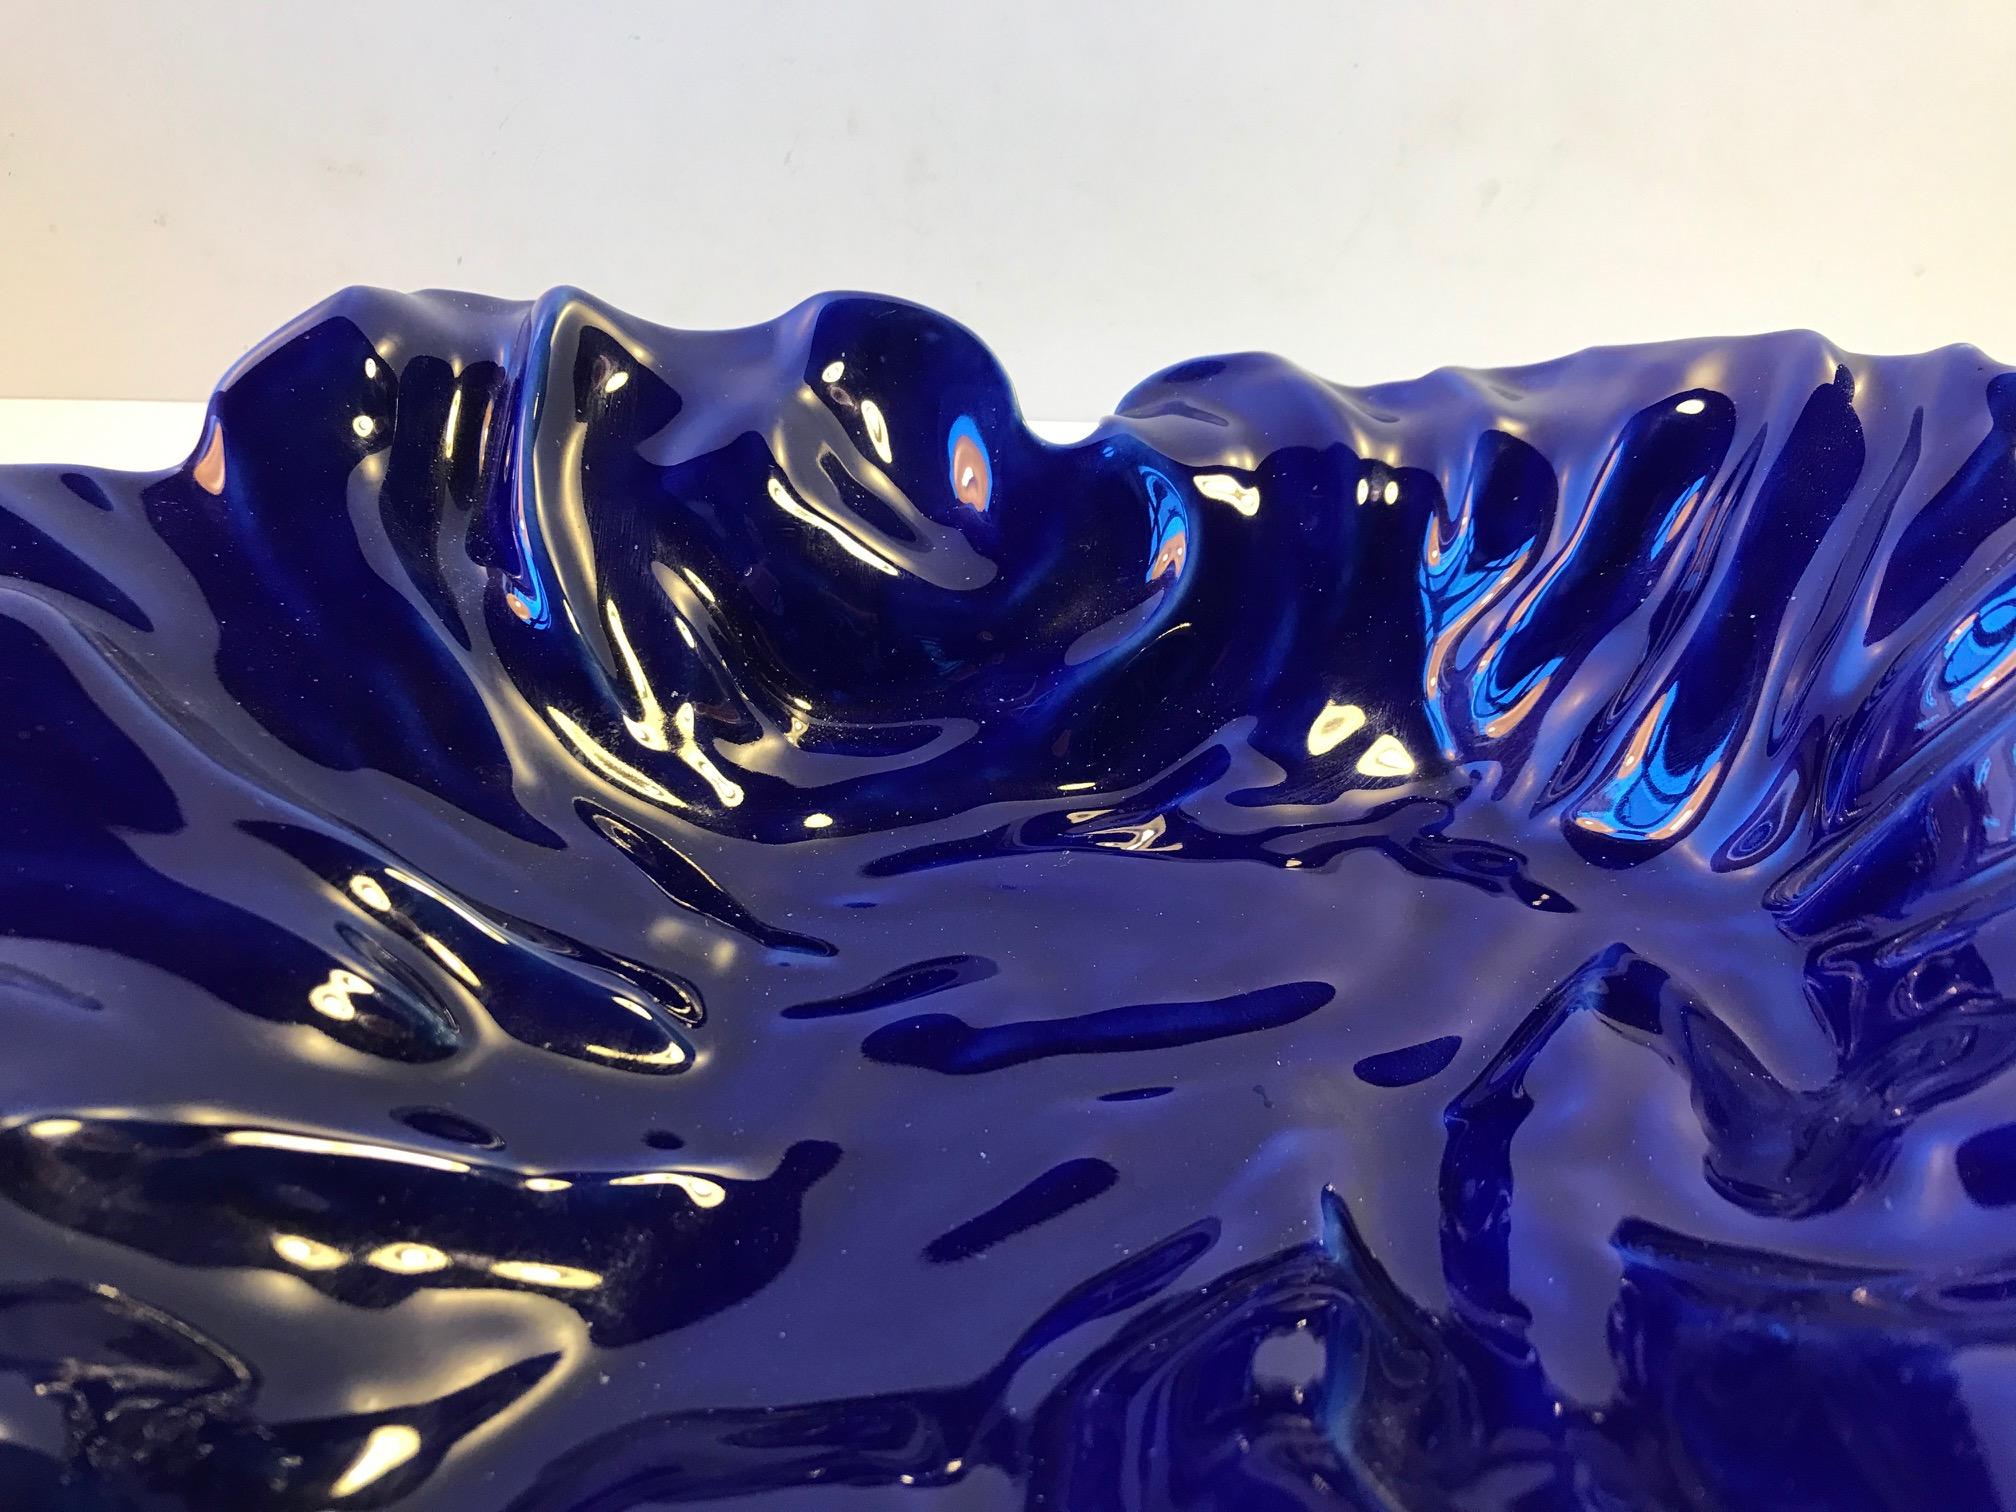 Cobalt blue glazed faience bowl by danish designer Ole Kortzau. It is called Natura due to its freeform shape. The is a piece from the 1990s and its stamped by Royal Copenhagen.